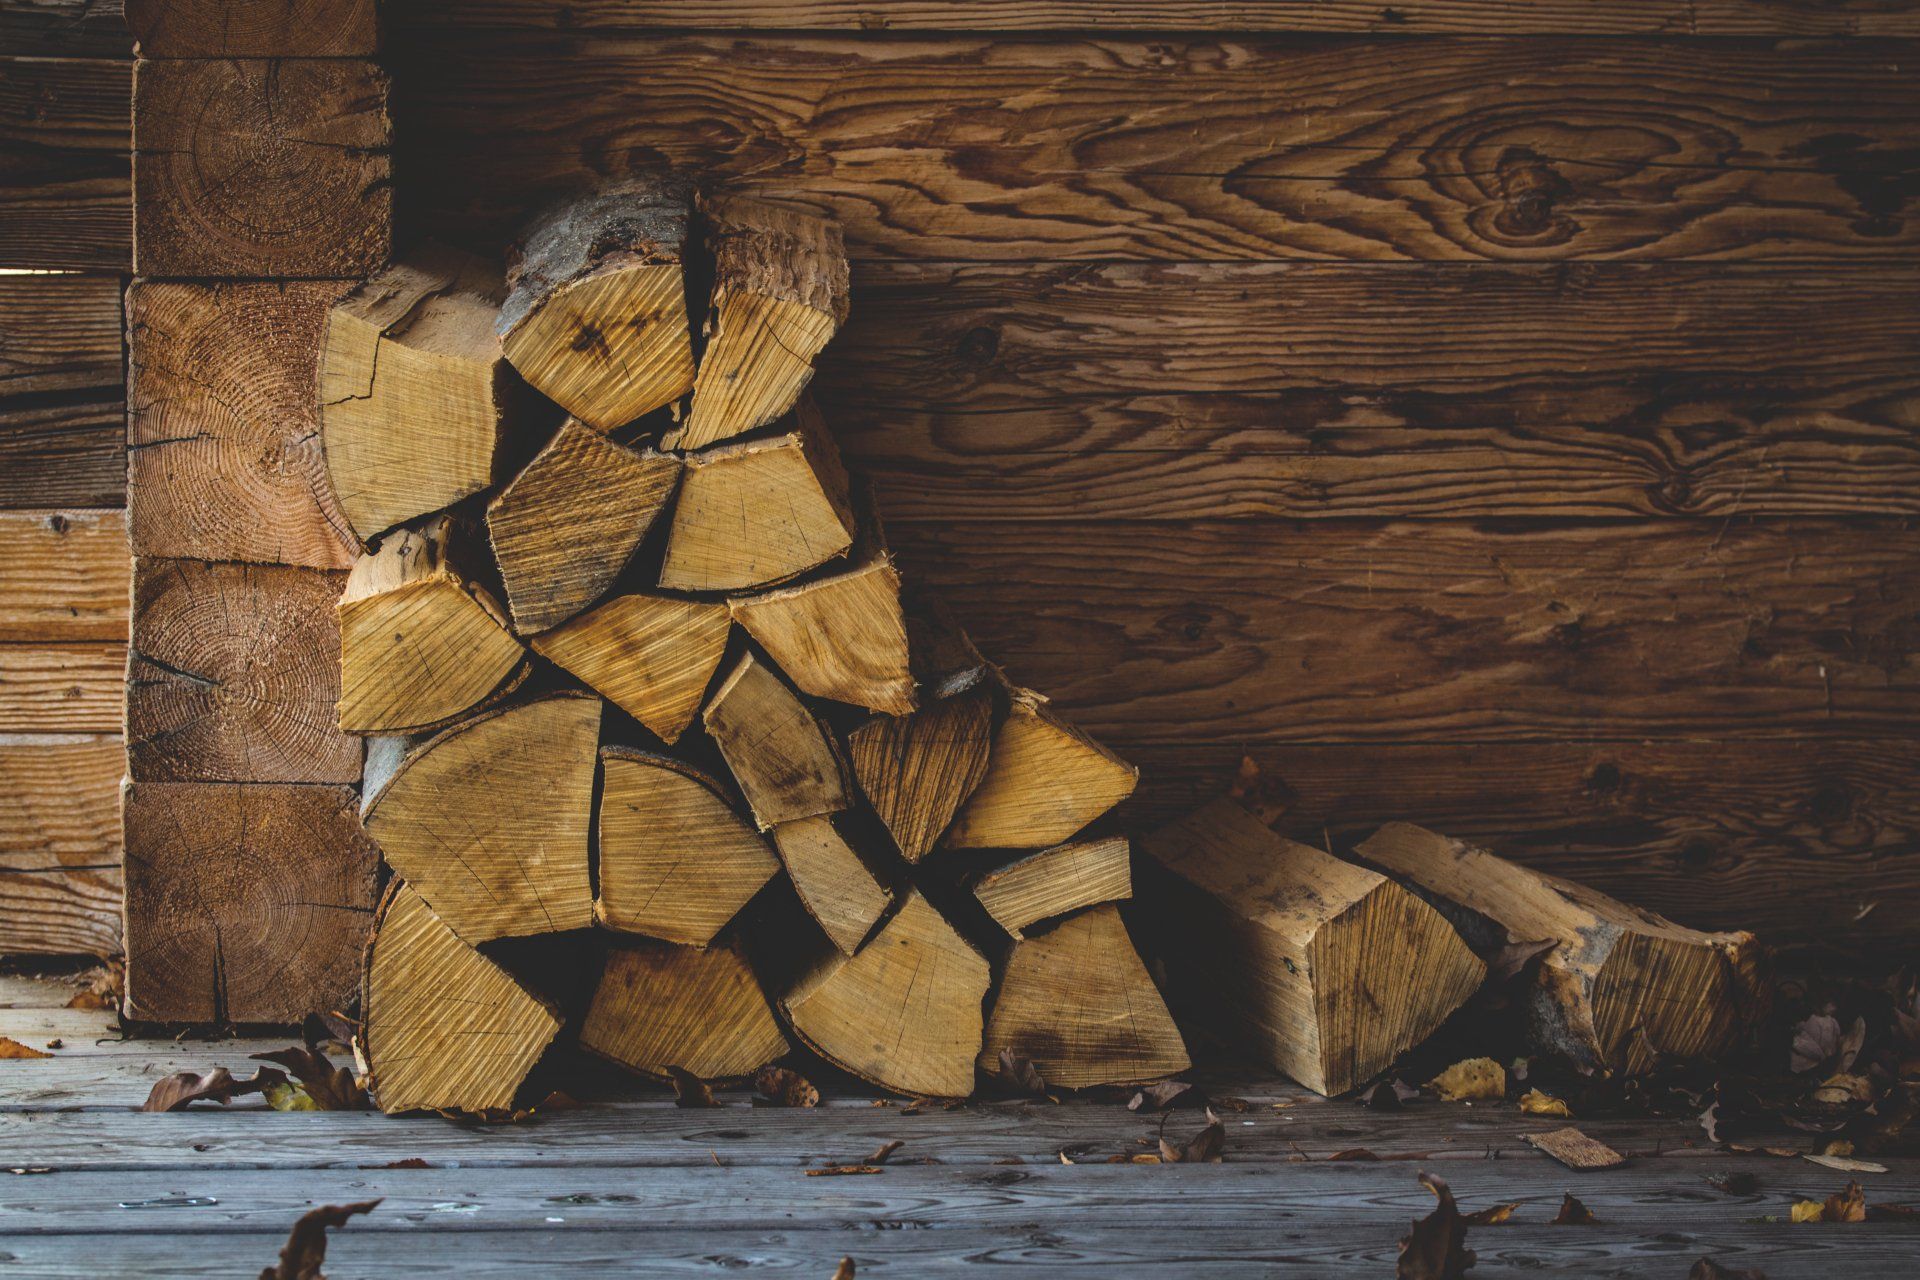 Stack firewood against a wood wall and floor